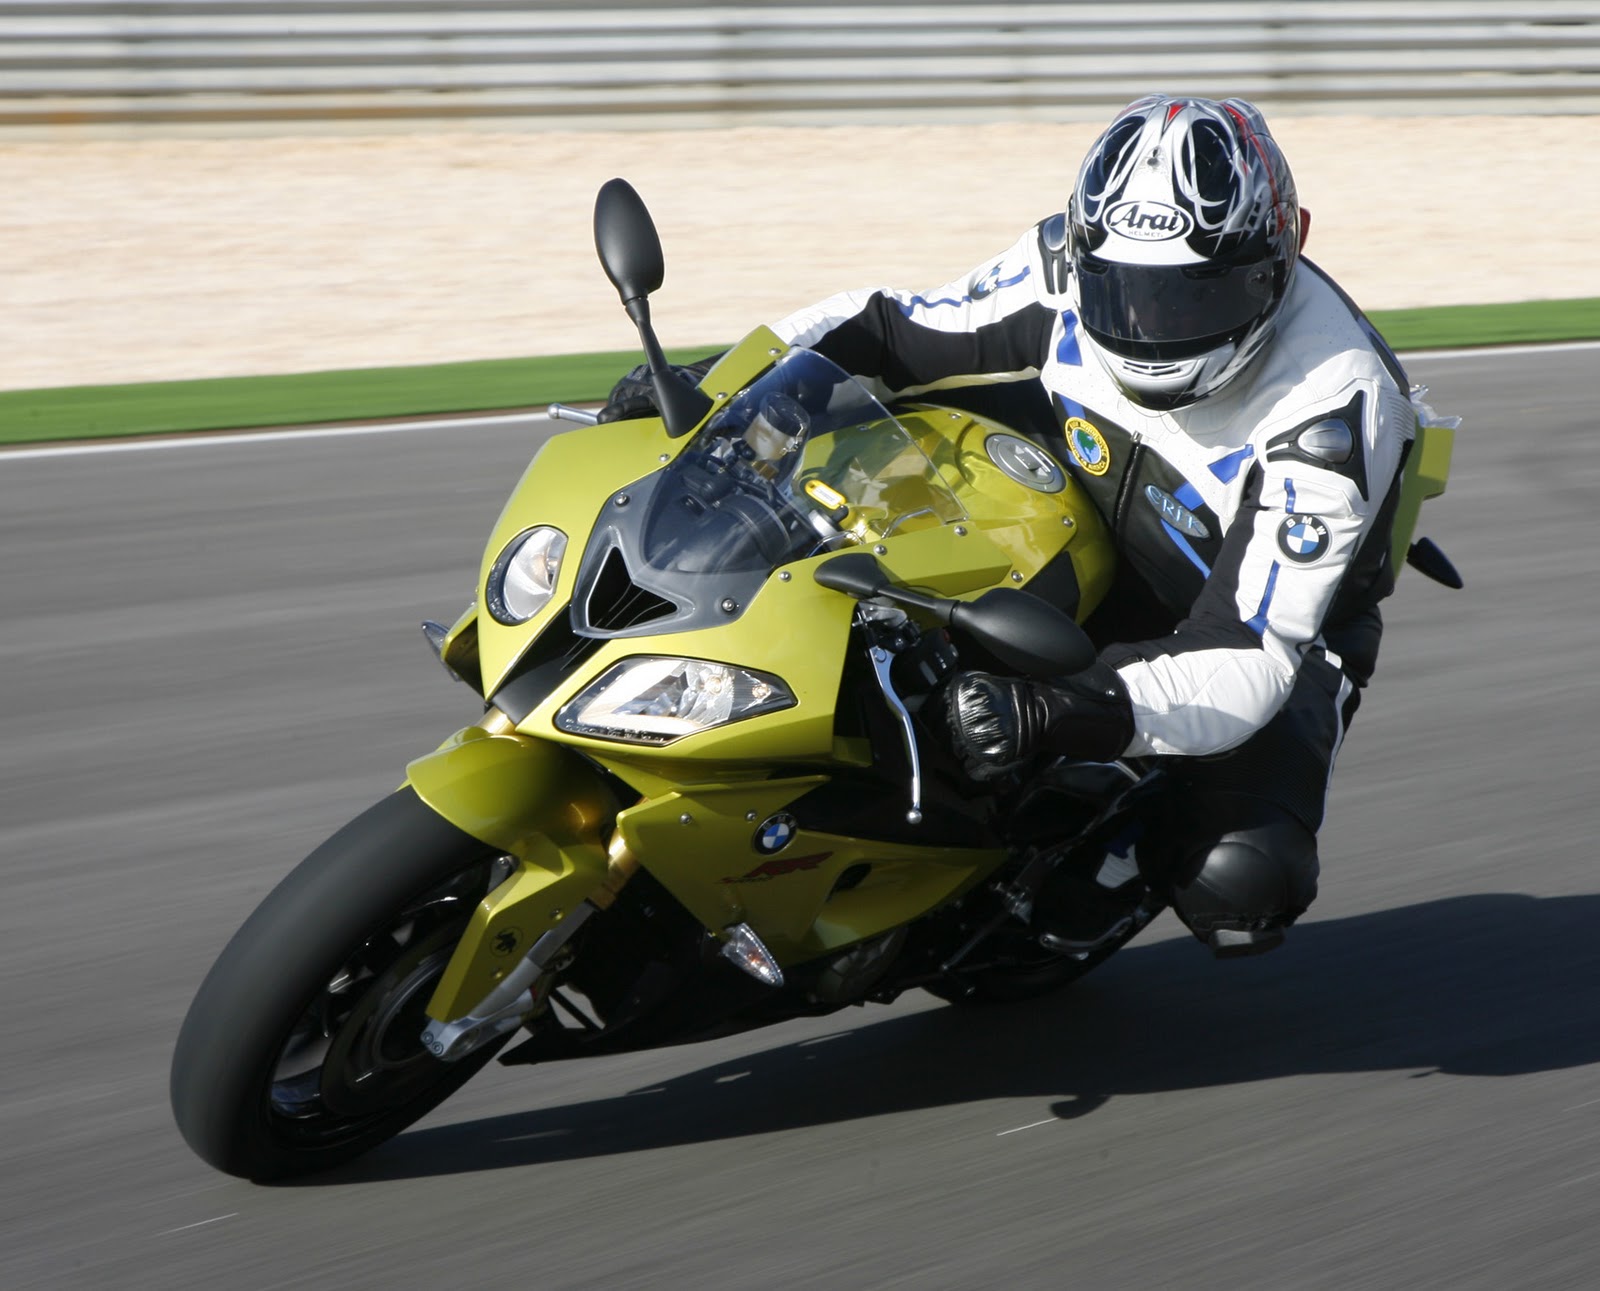 2010 BMW S1000RR - THEY NAILED